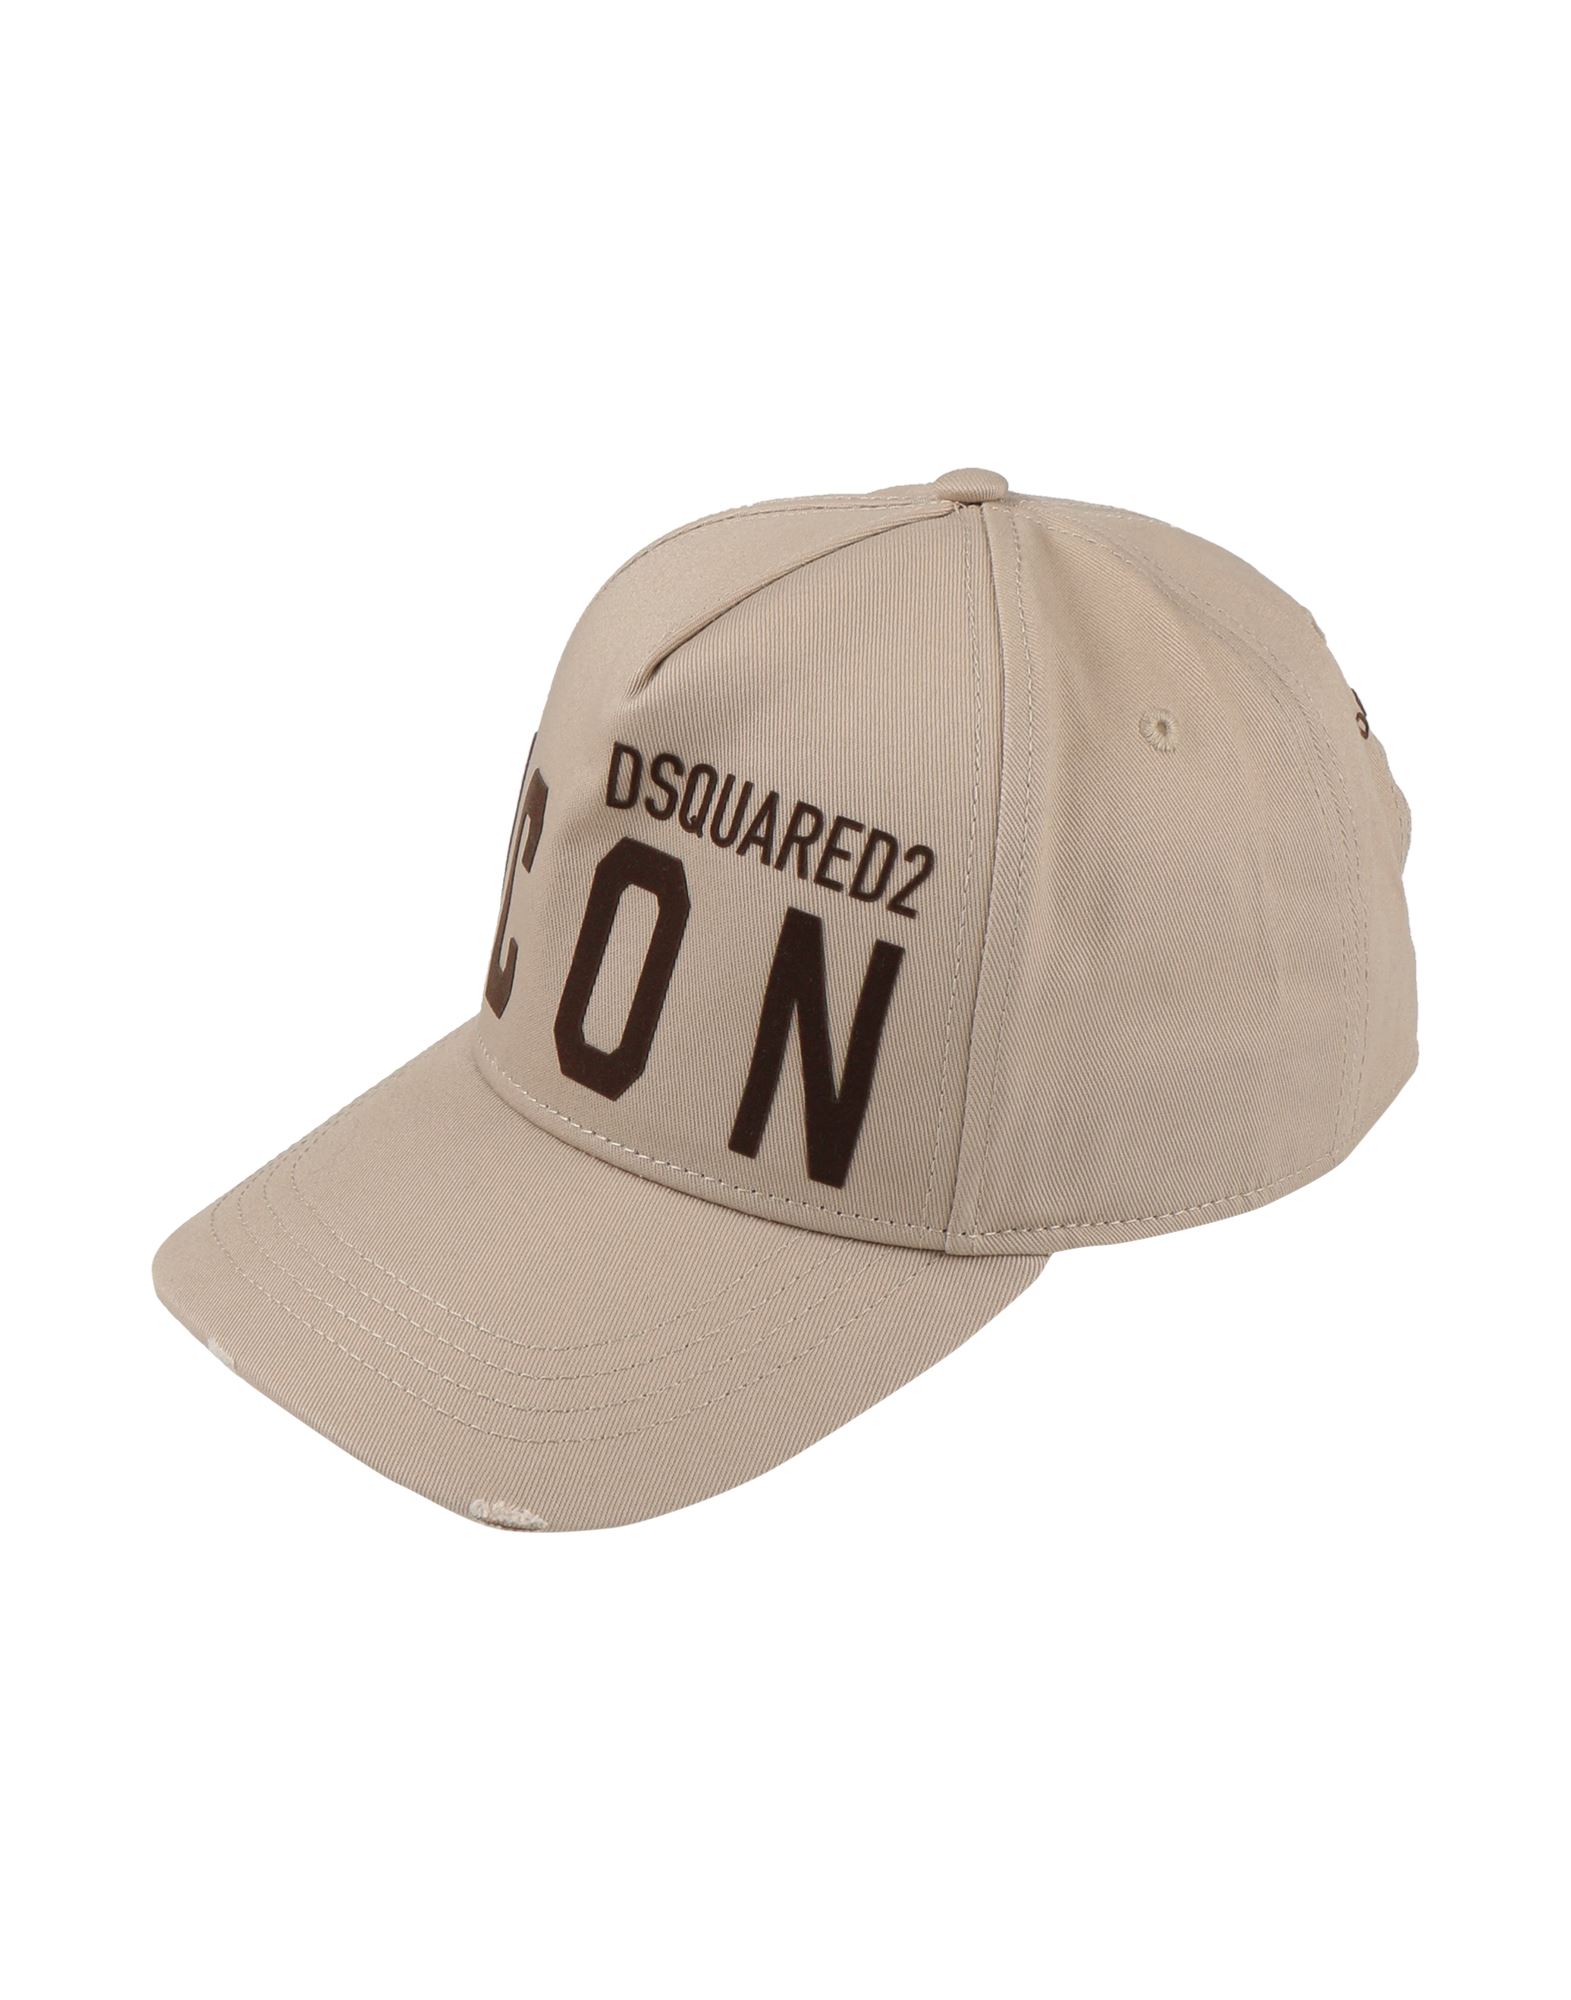 Dsquared2 Hats In Beige